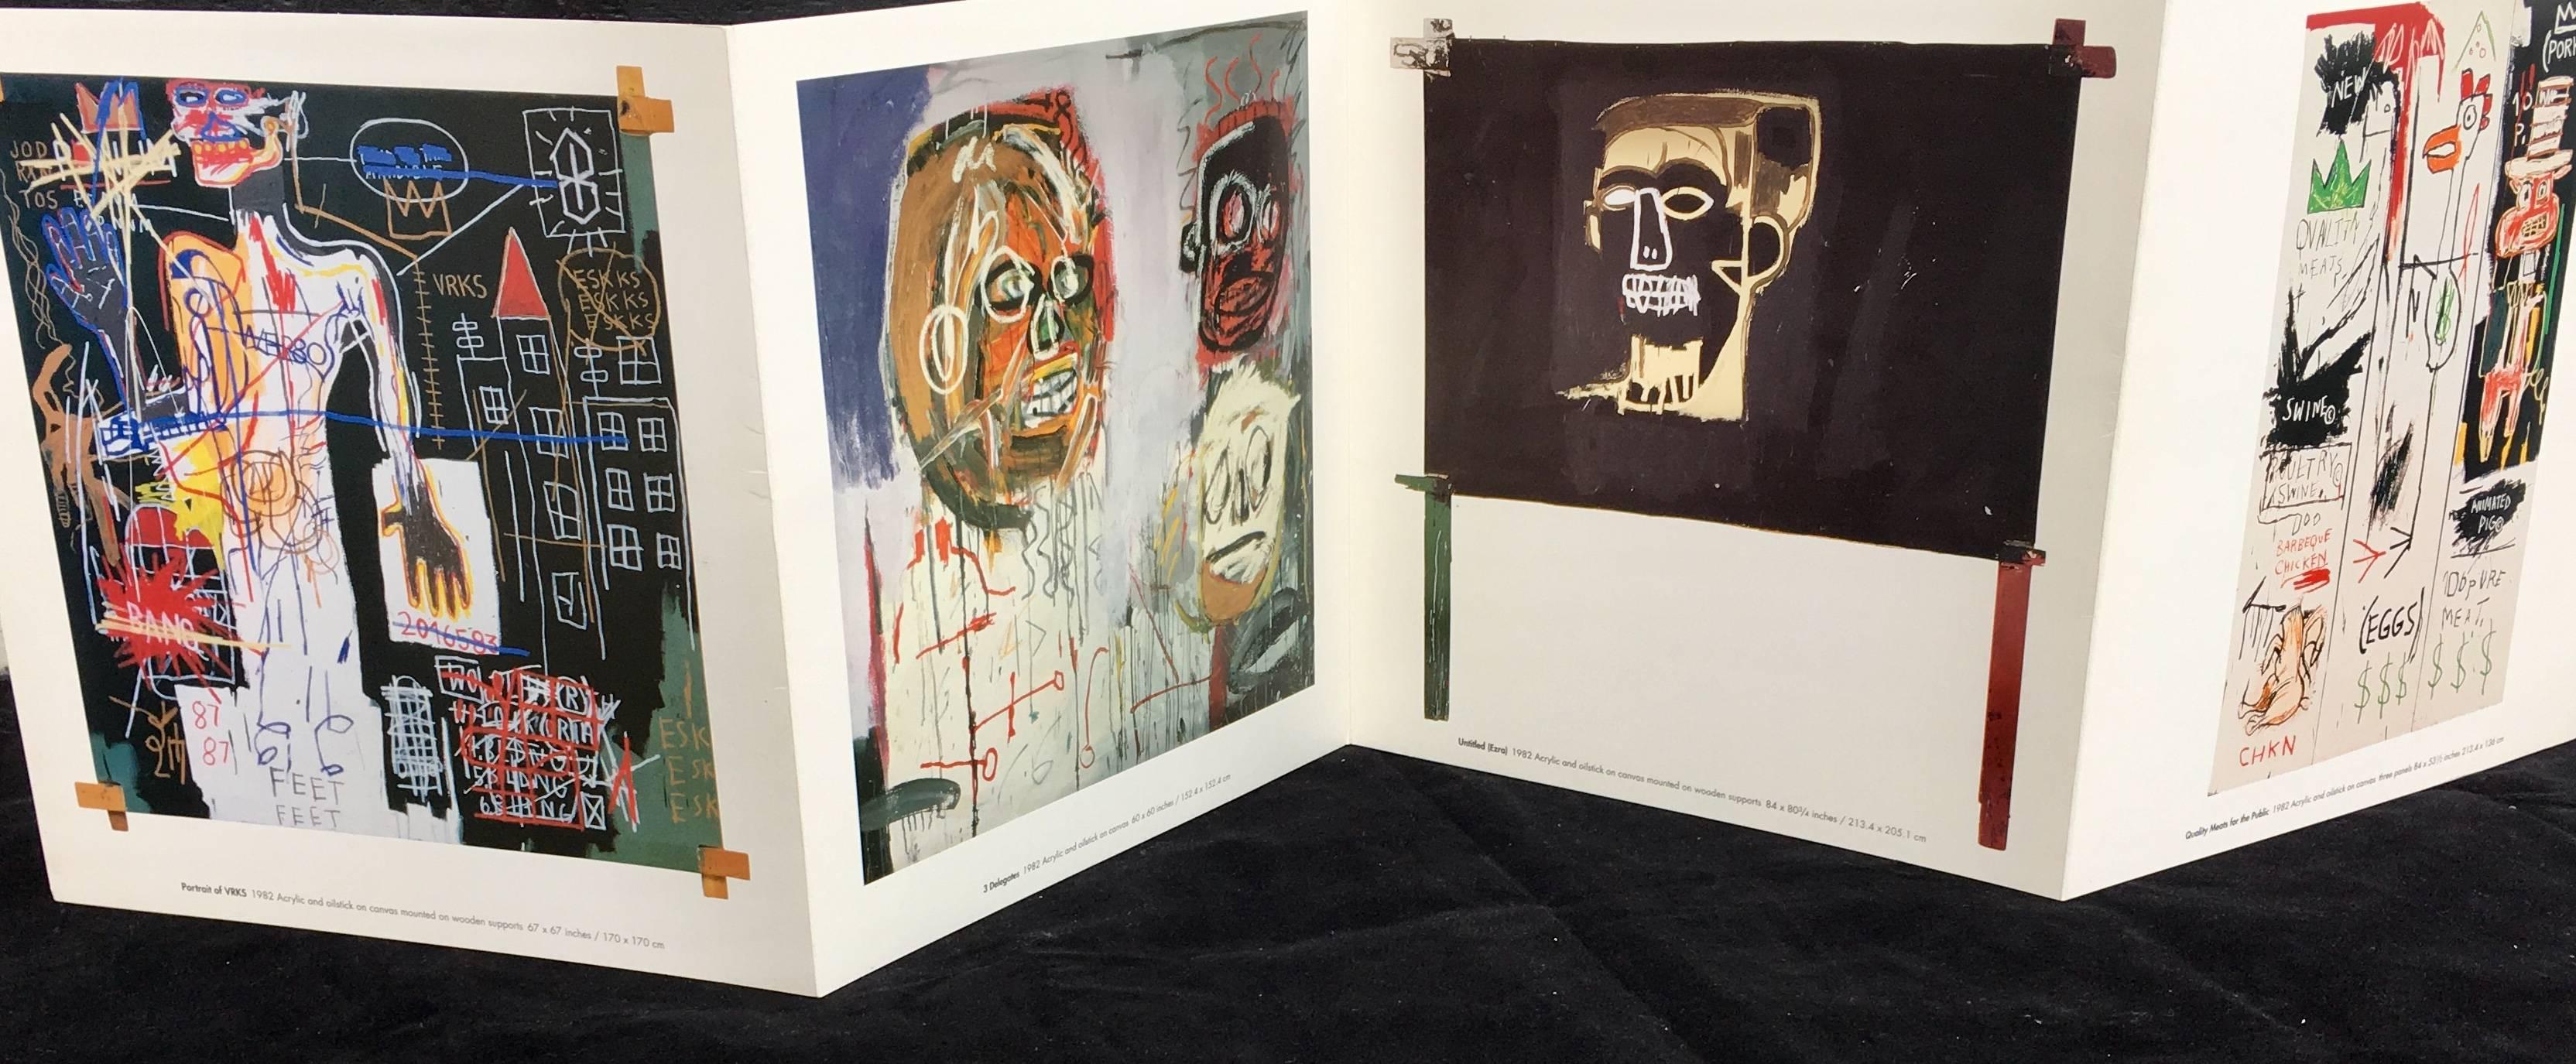 Jean-Michel Basquiat at Tony Shafrazi Gallery, New York: October 1 to November 13, 1999: vintage original poster/show card   

8.5 x 8.5 inches opening accordion to style to feature four double-sided panels featuring reproductions of 7 Basquiat